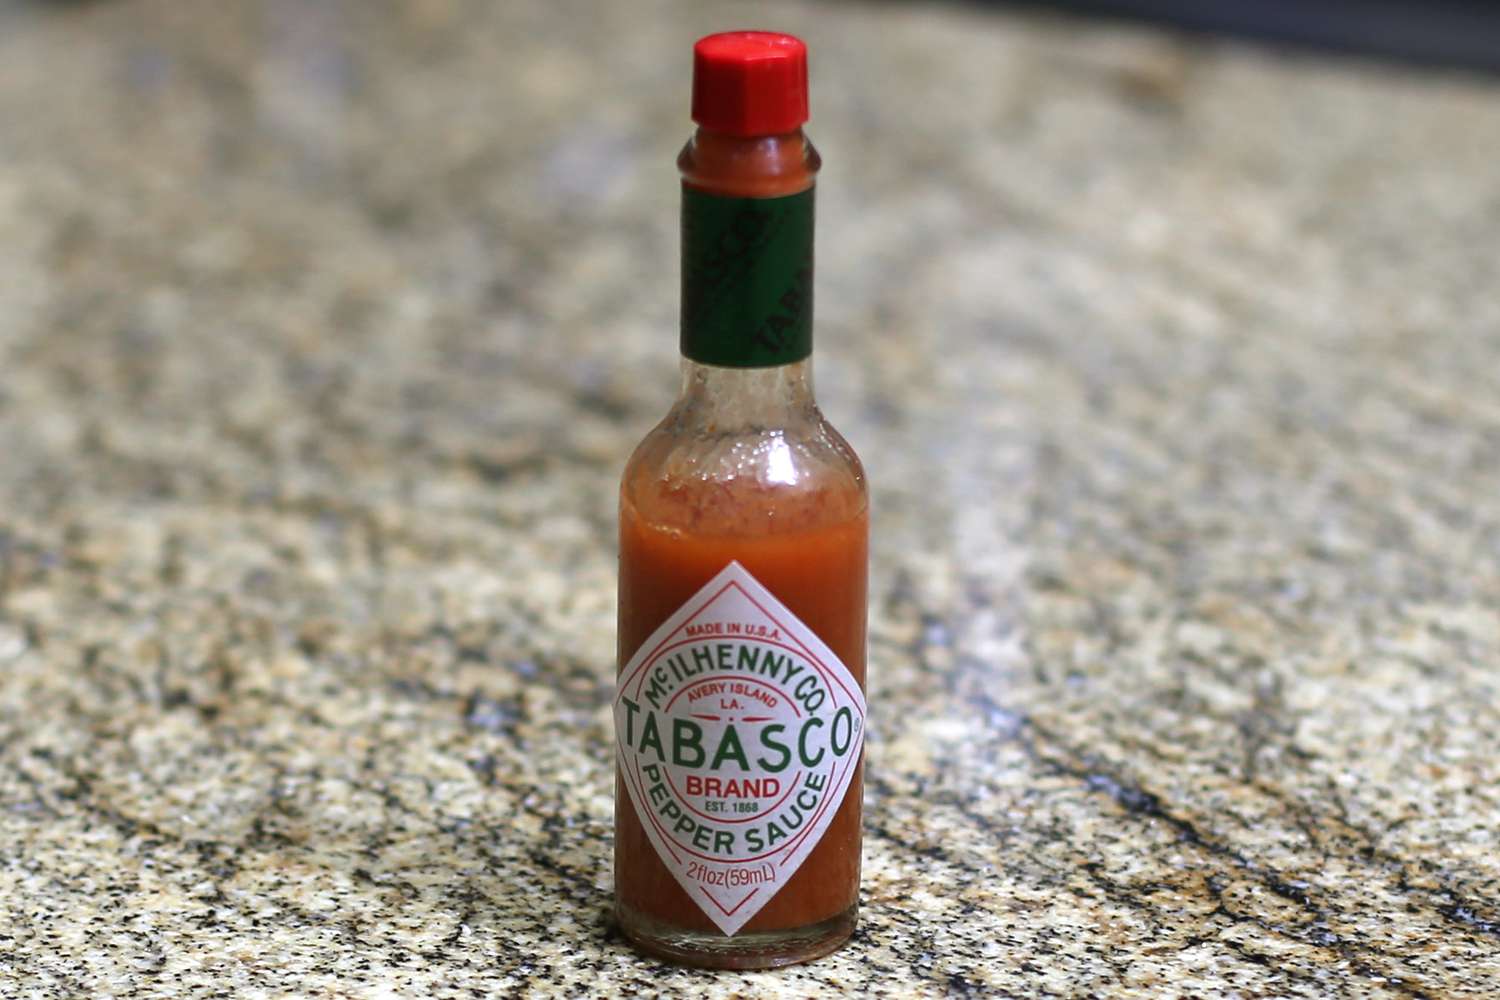 18-facts-about-tabasco